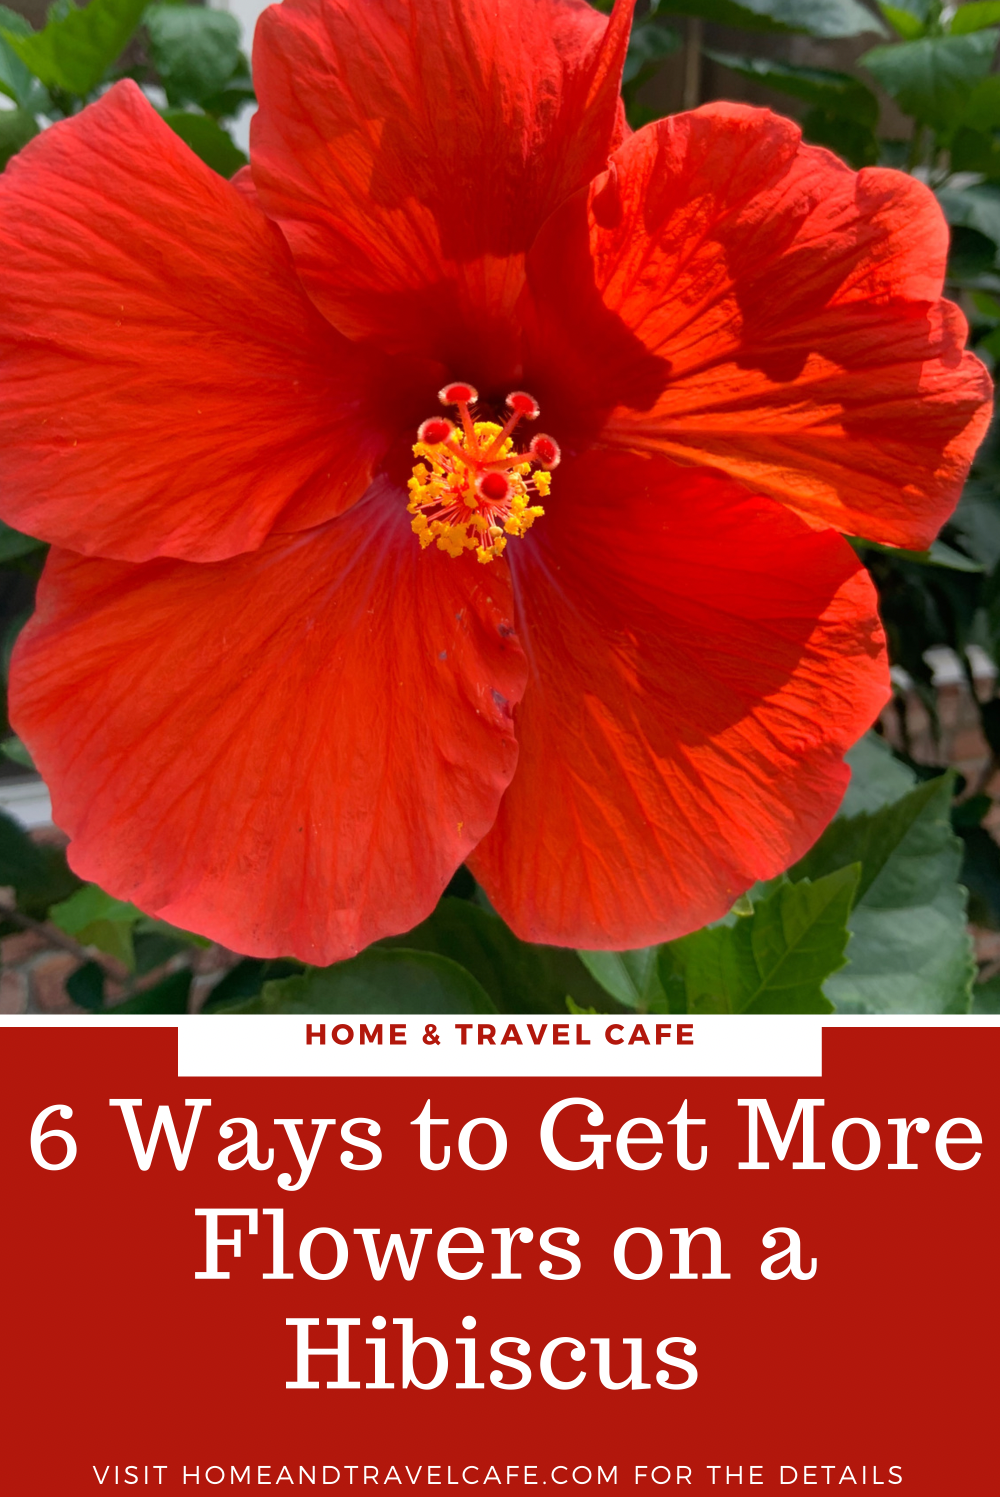 6 Ways to Get More Flowers on a Hibiscus